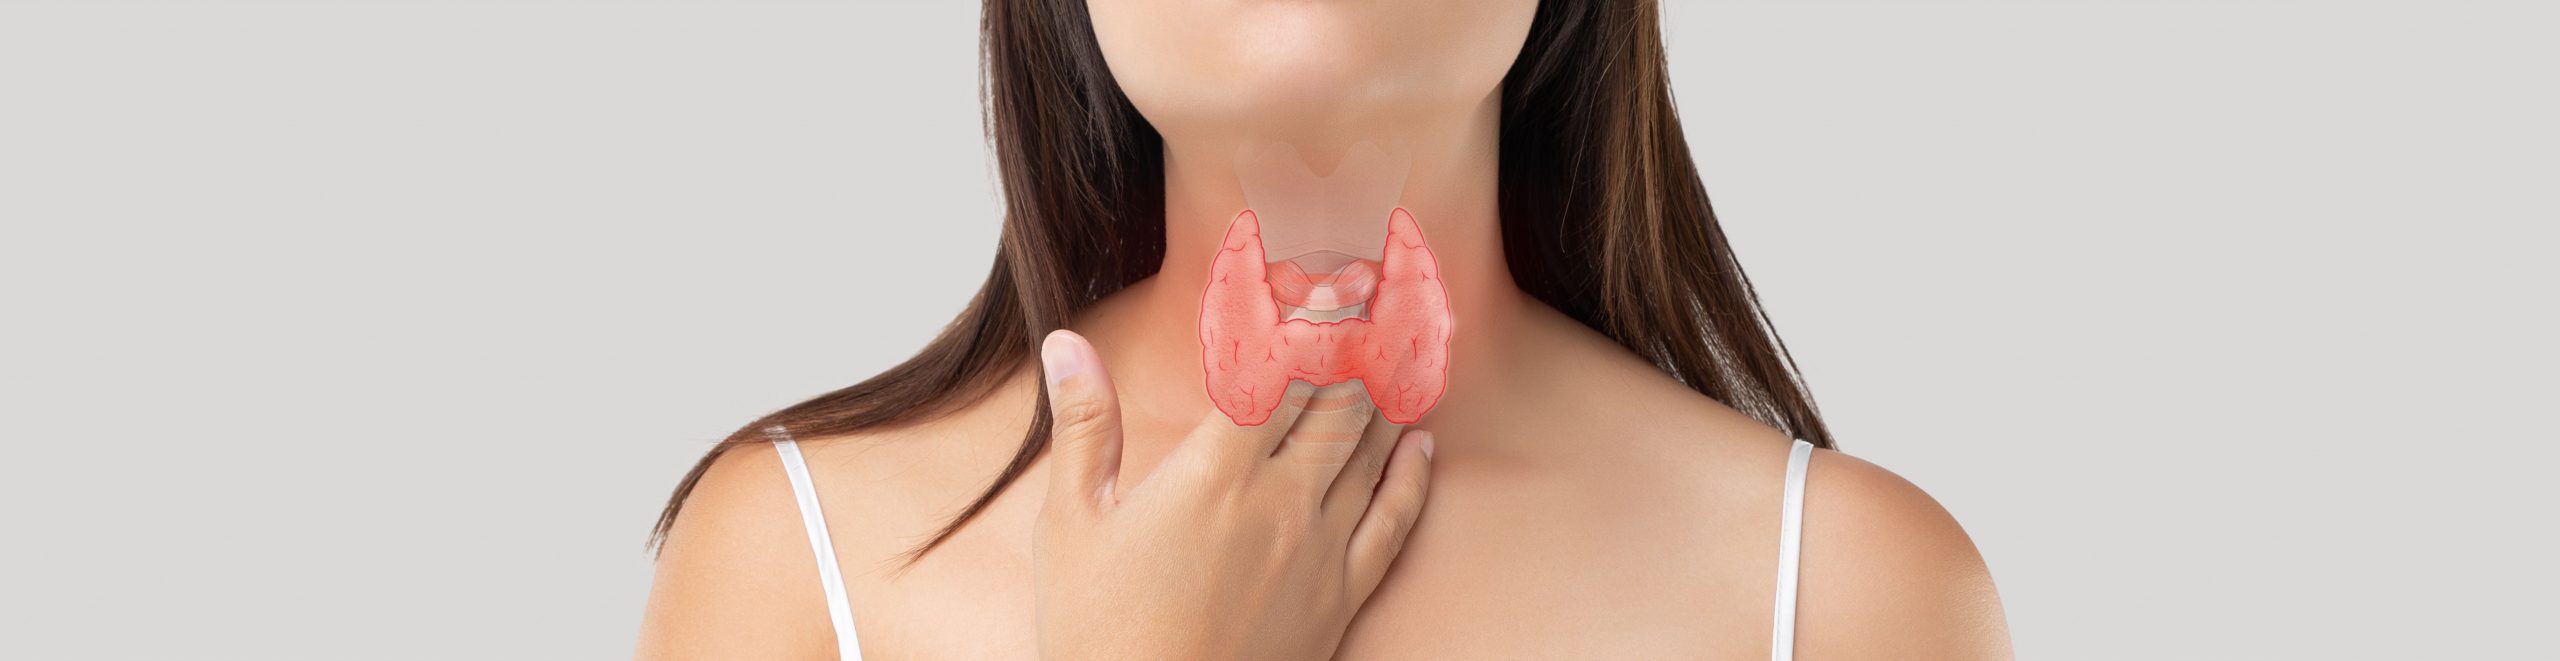 lady touching her thyroid